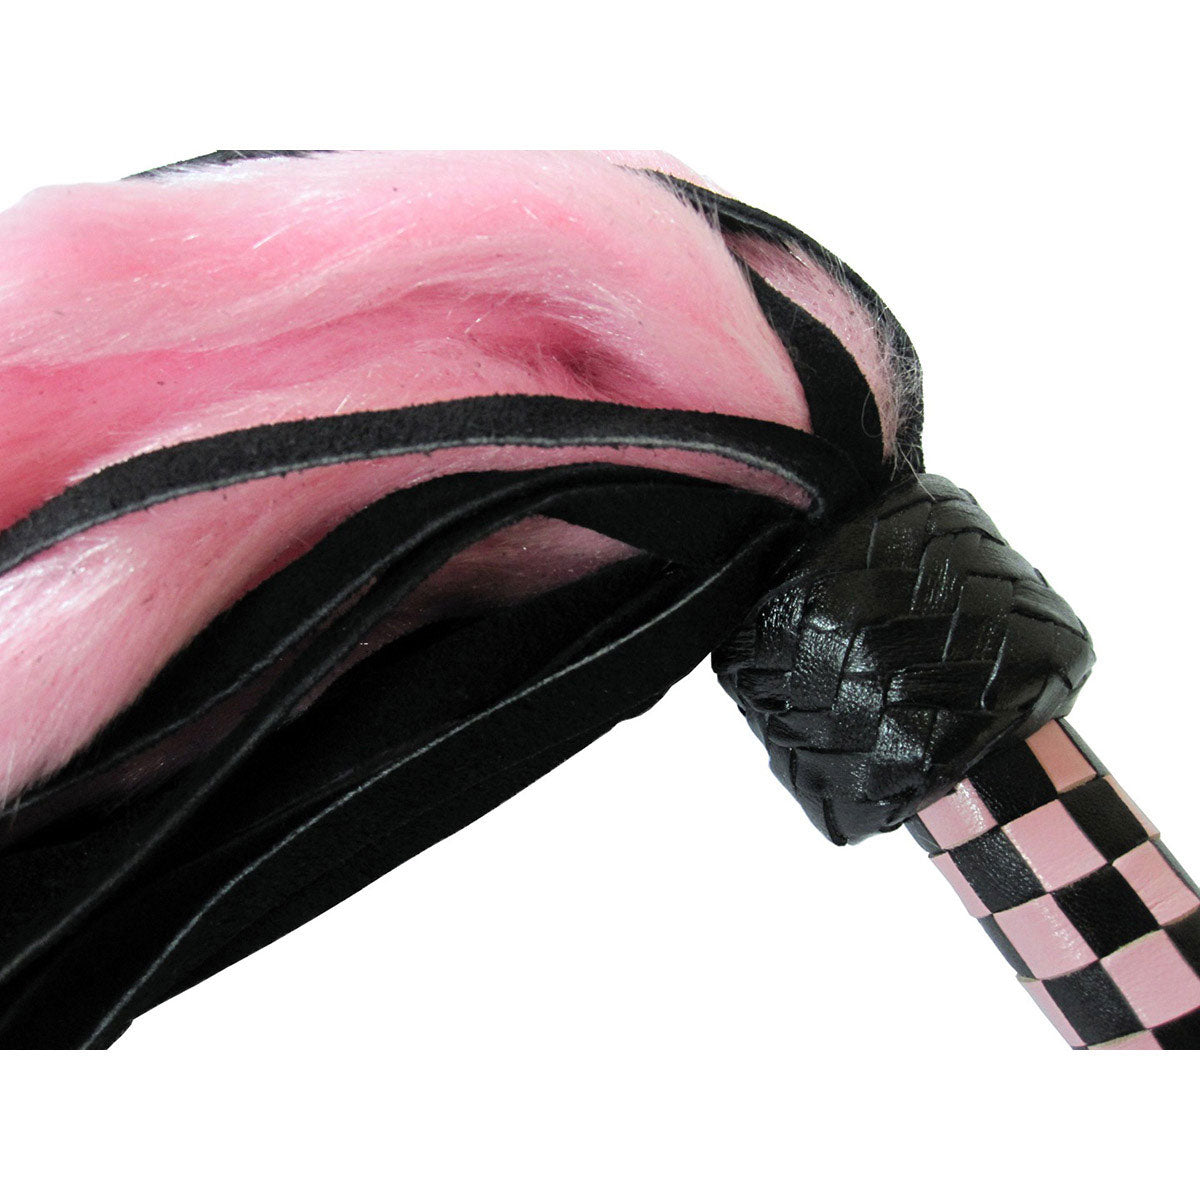 Suede and Fluff MINI Flogger - 18" - Pink/Black